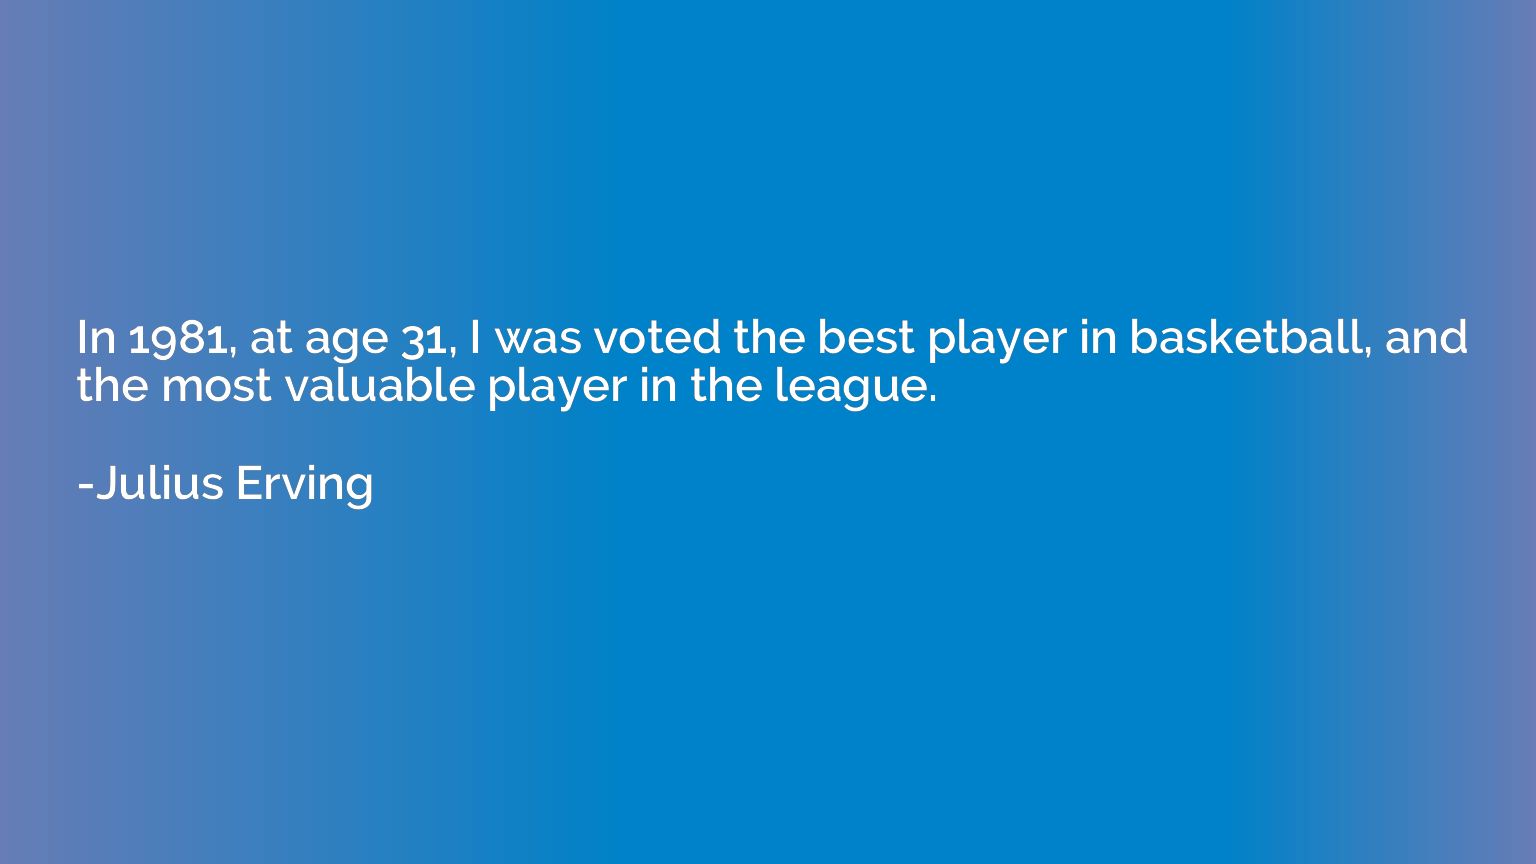 In 1981, at age 31, I was voted the best player in basketbal